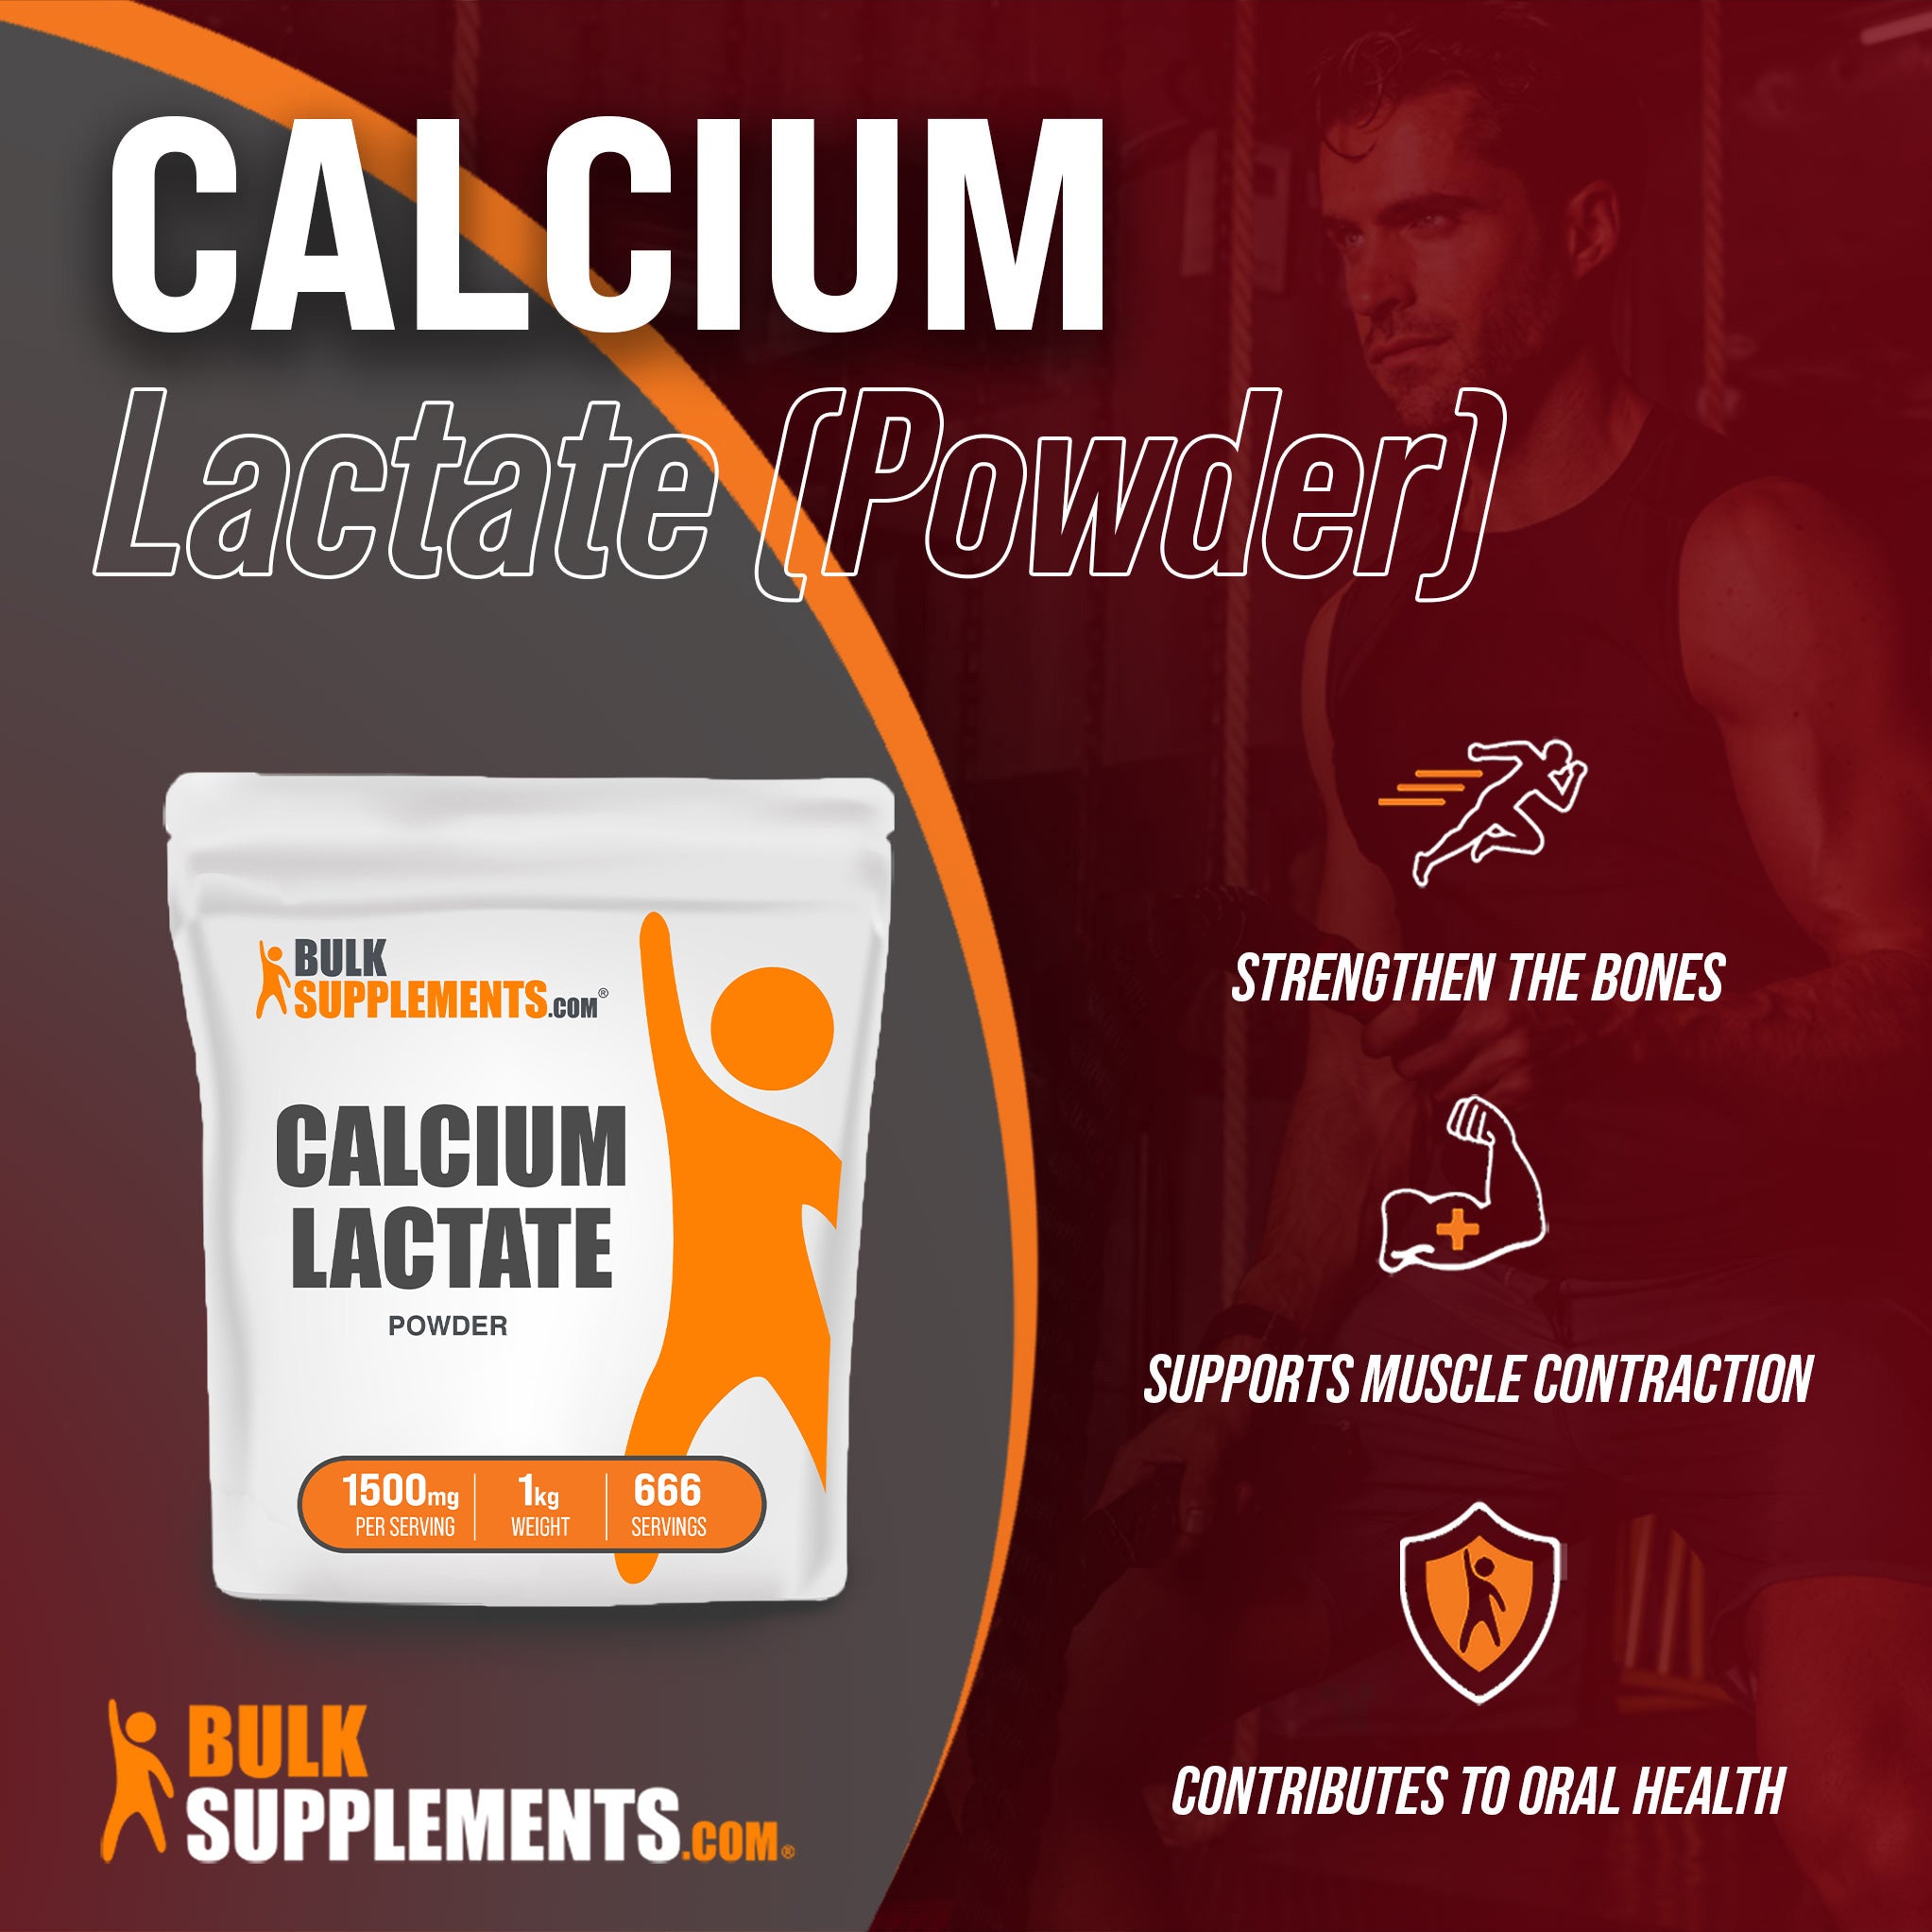 Benefits of Calcium Lactate Powder; strengthen the bones, supports muscle contraction, contributes to oral health